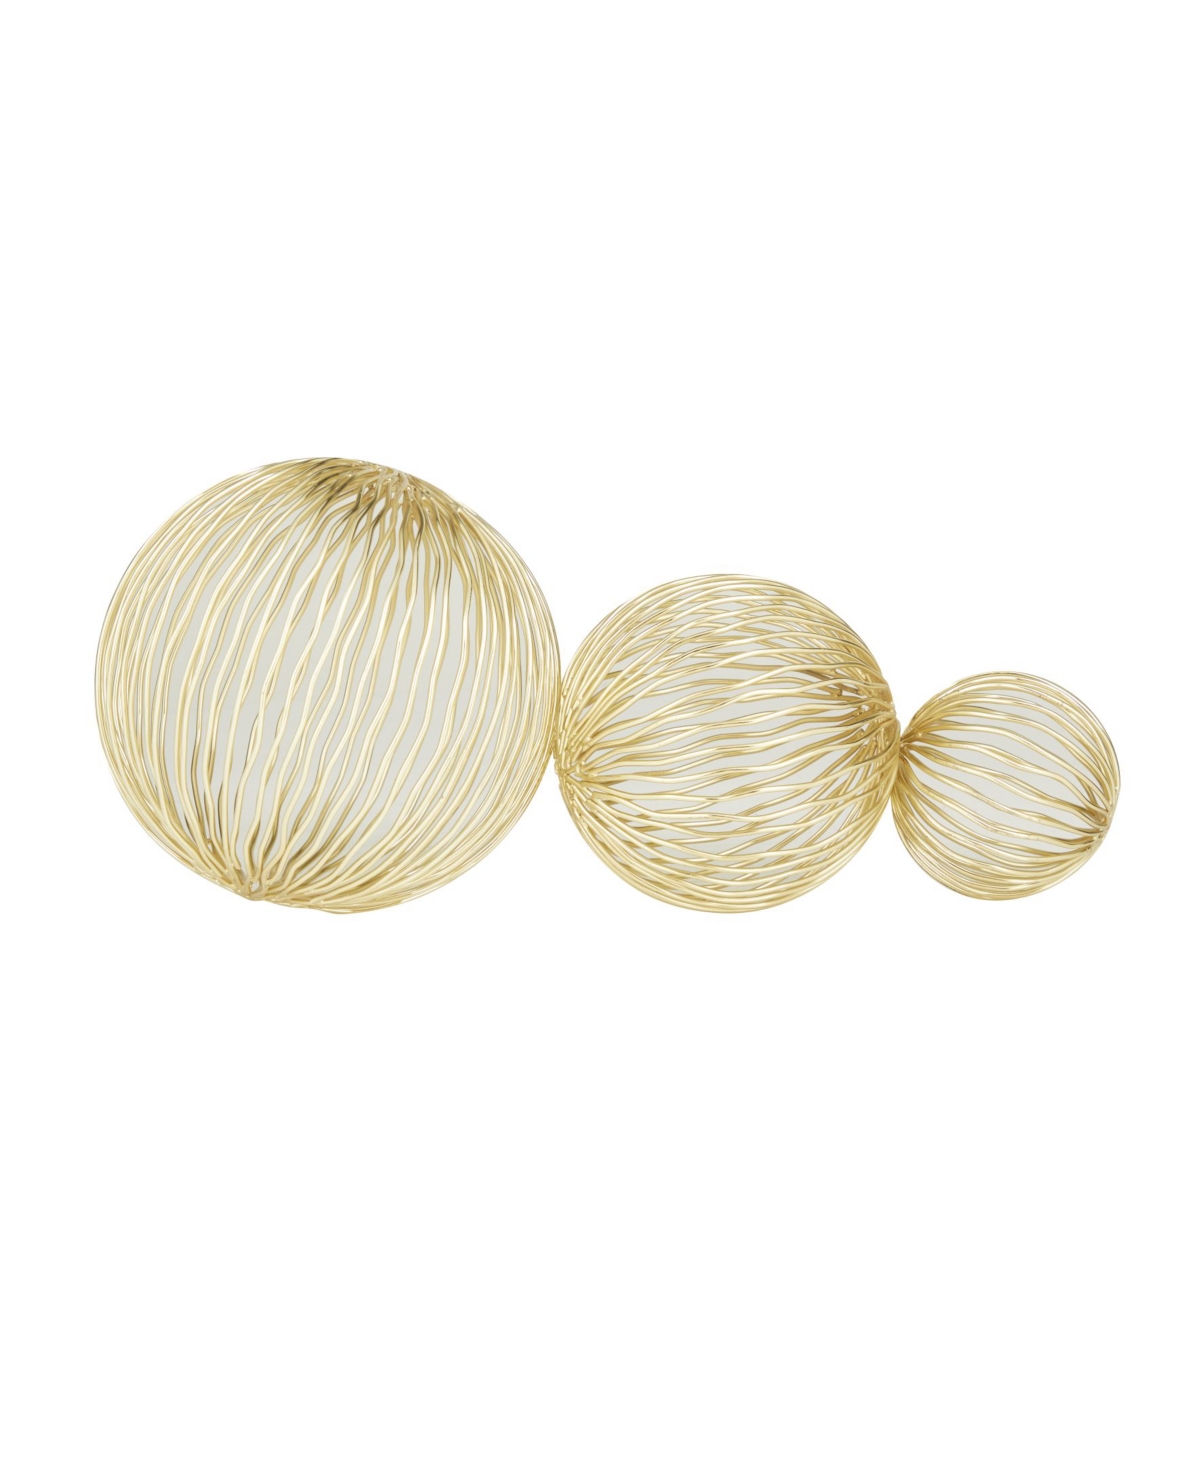 Rosemary Lane Glam Sculpture, Set Of 3 In Gold-tone